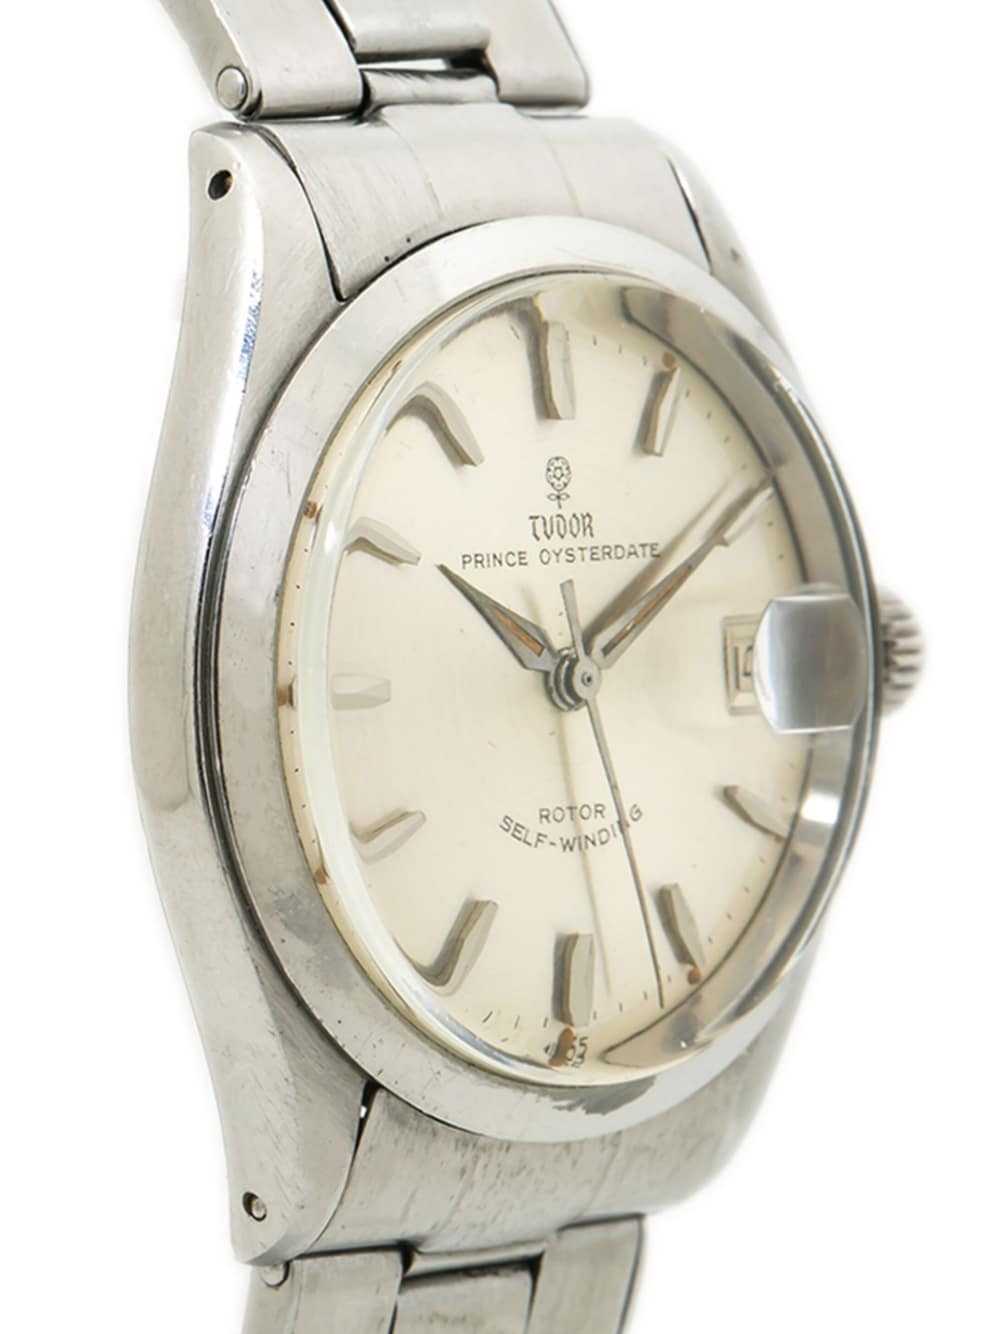 TUDOR pre-owned Prince OysterDate 34mm - Silver - image 4